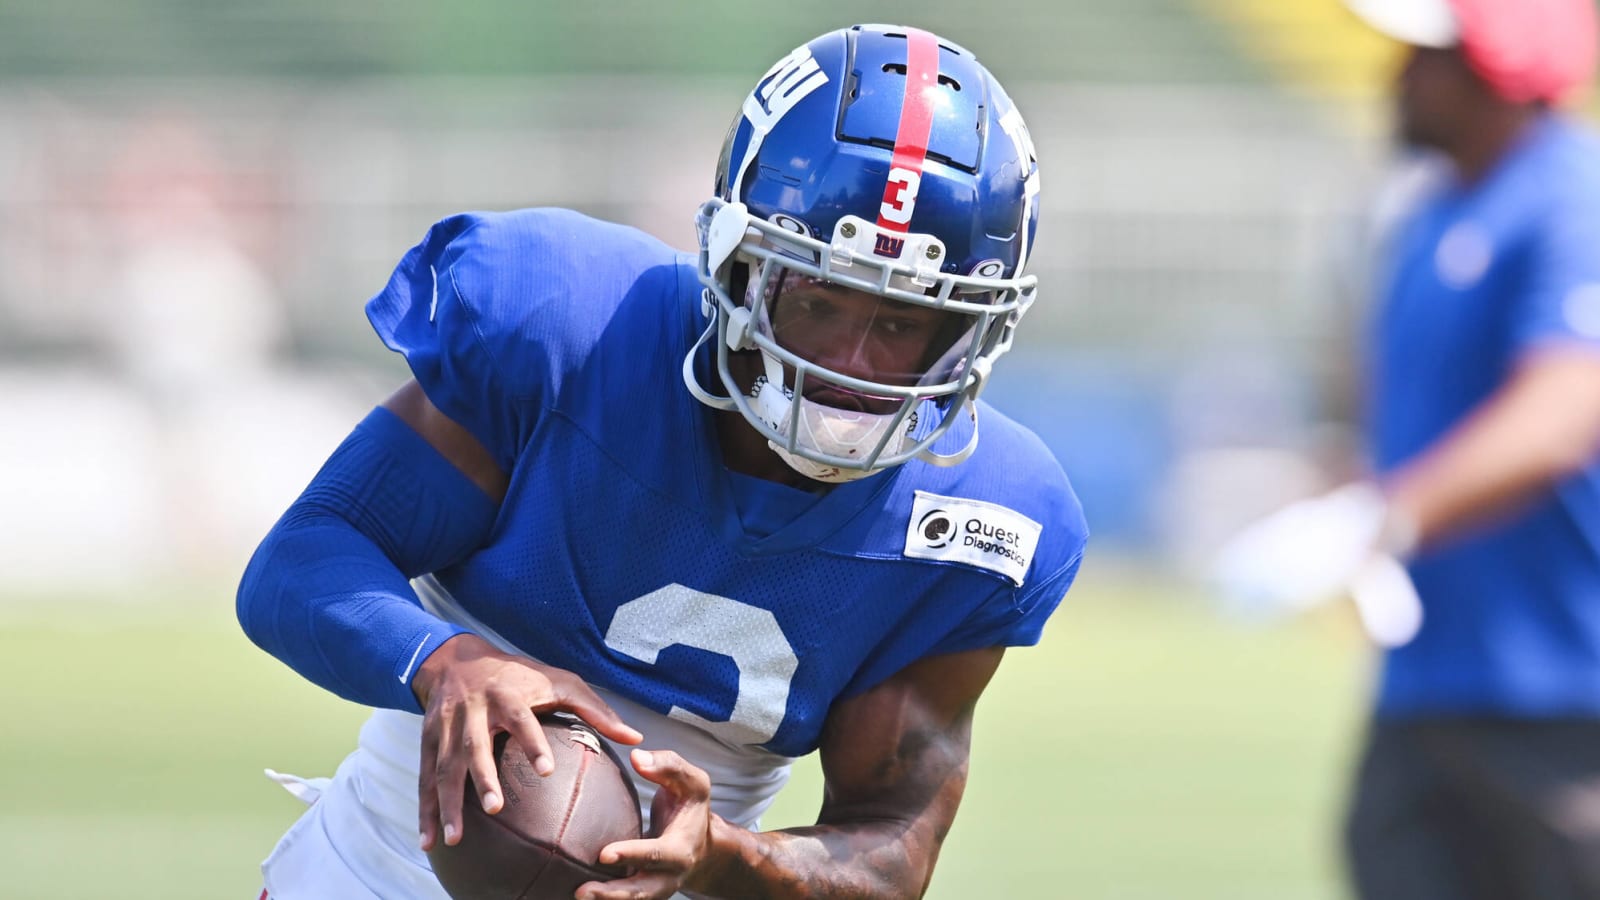 Giants WR Sterling Shepard to return to practice